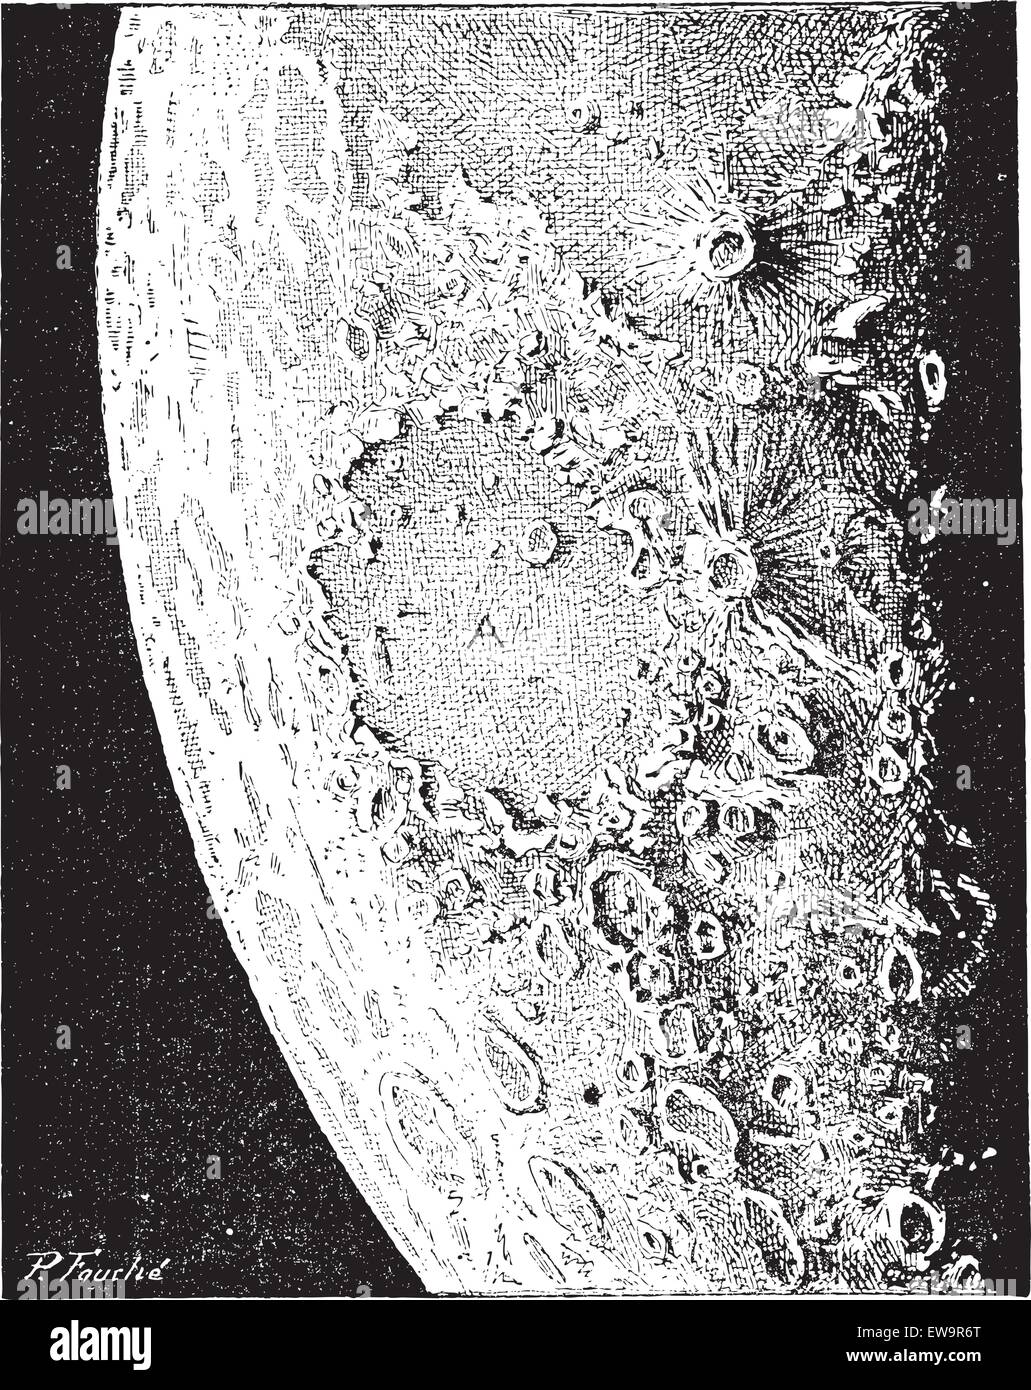 Surface of the Moon, showing numerous volcanic craters and impact craters, vintage engraved illustration. Dictionary of Words an Stock Vector